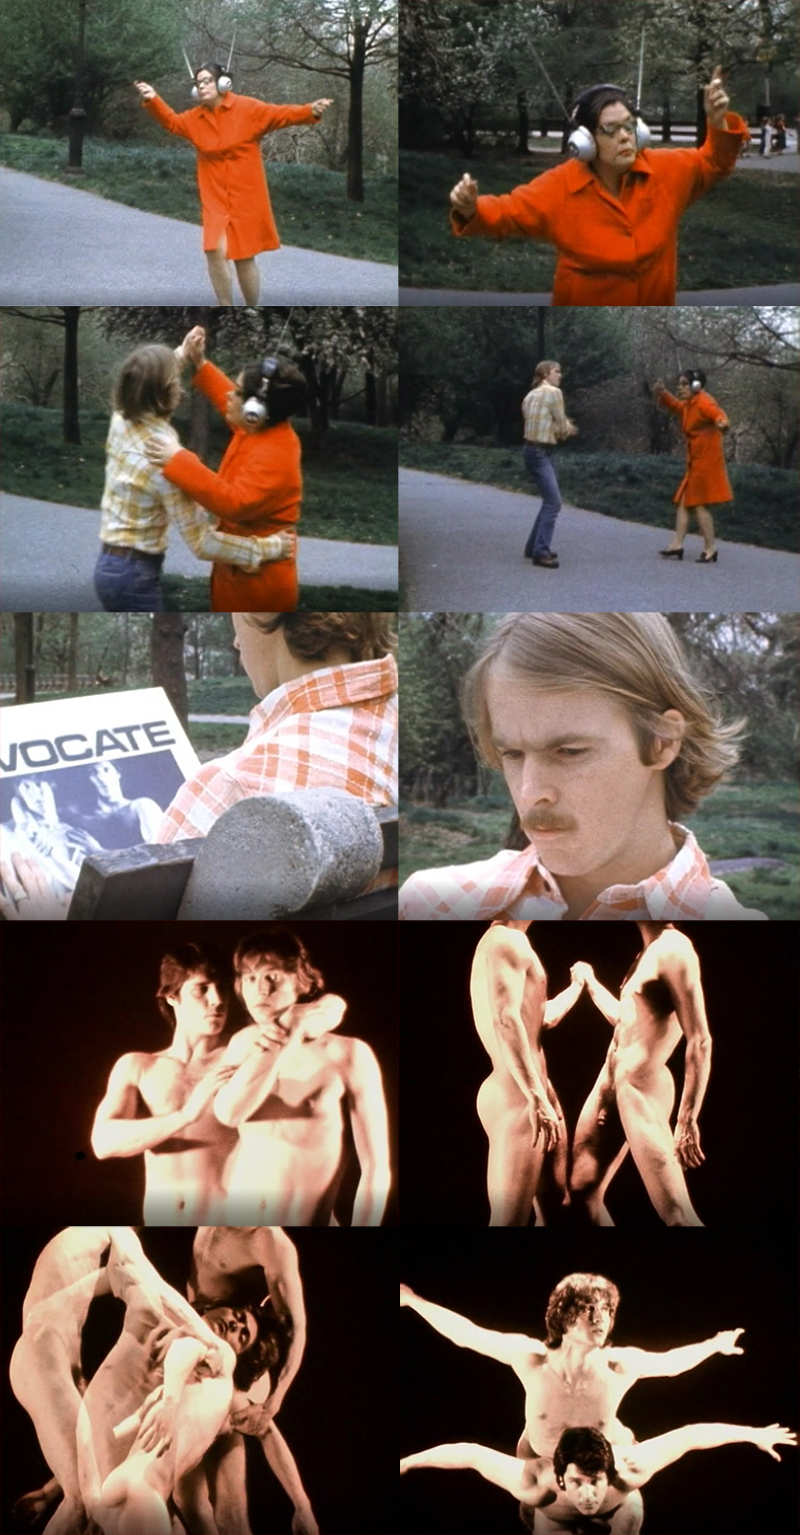 Great Non-Sex Moments in 1970s Gay Porn Films